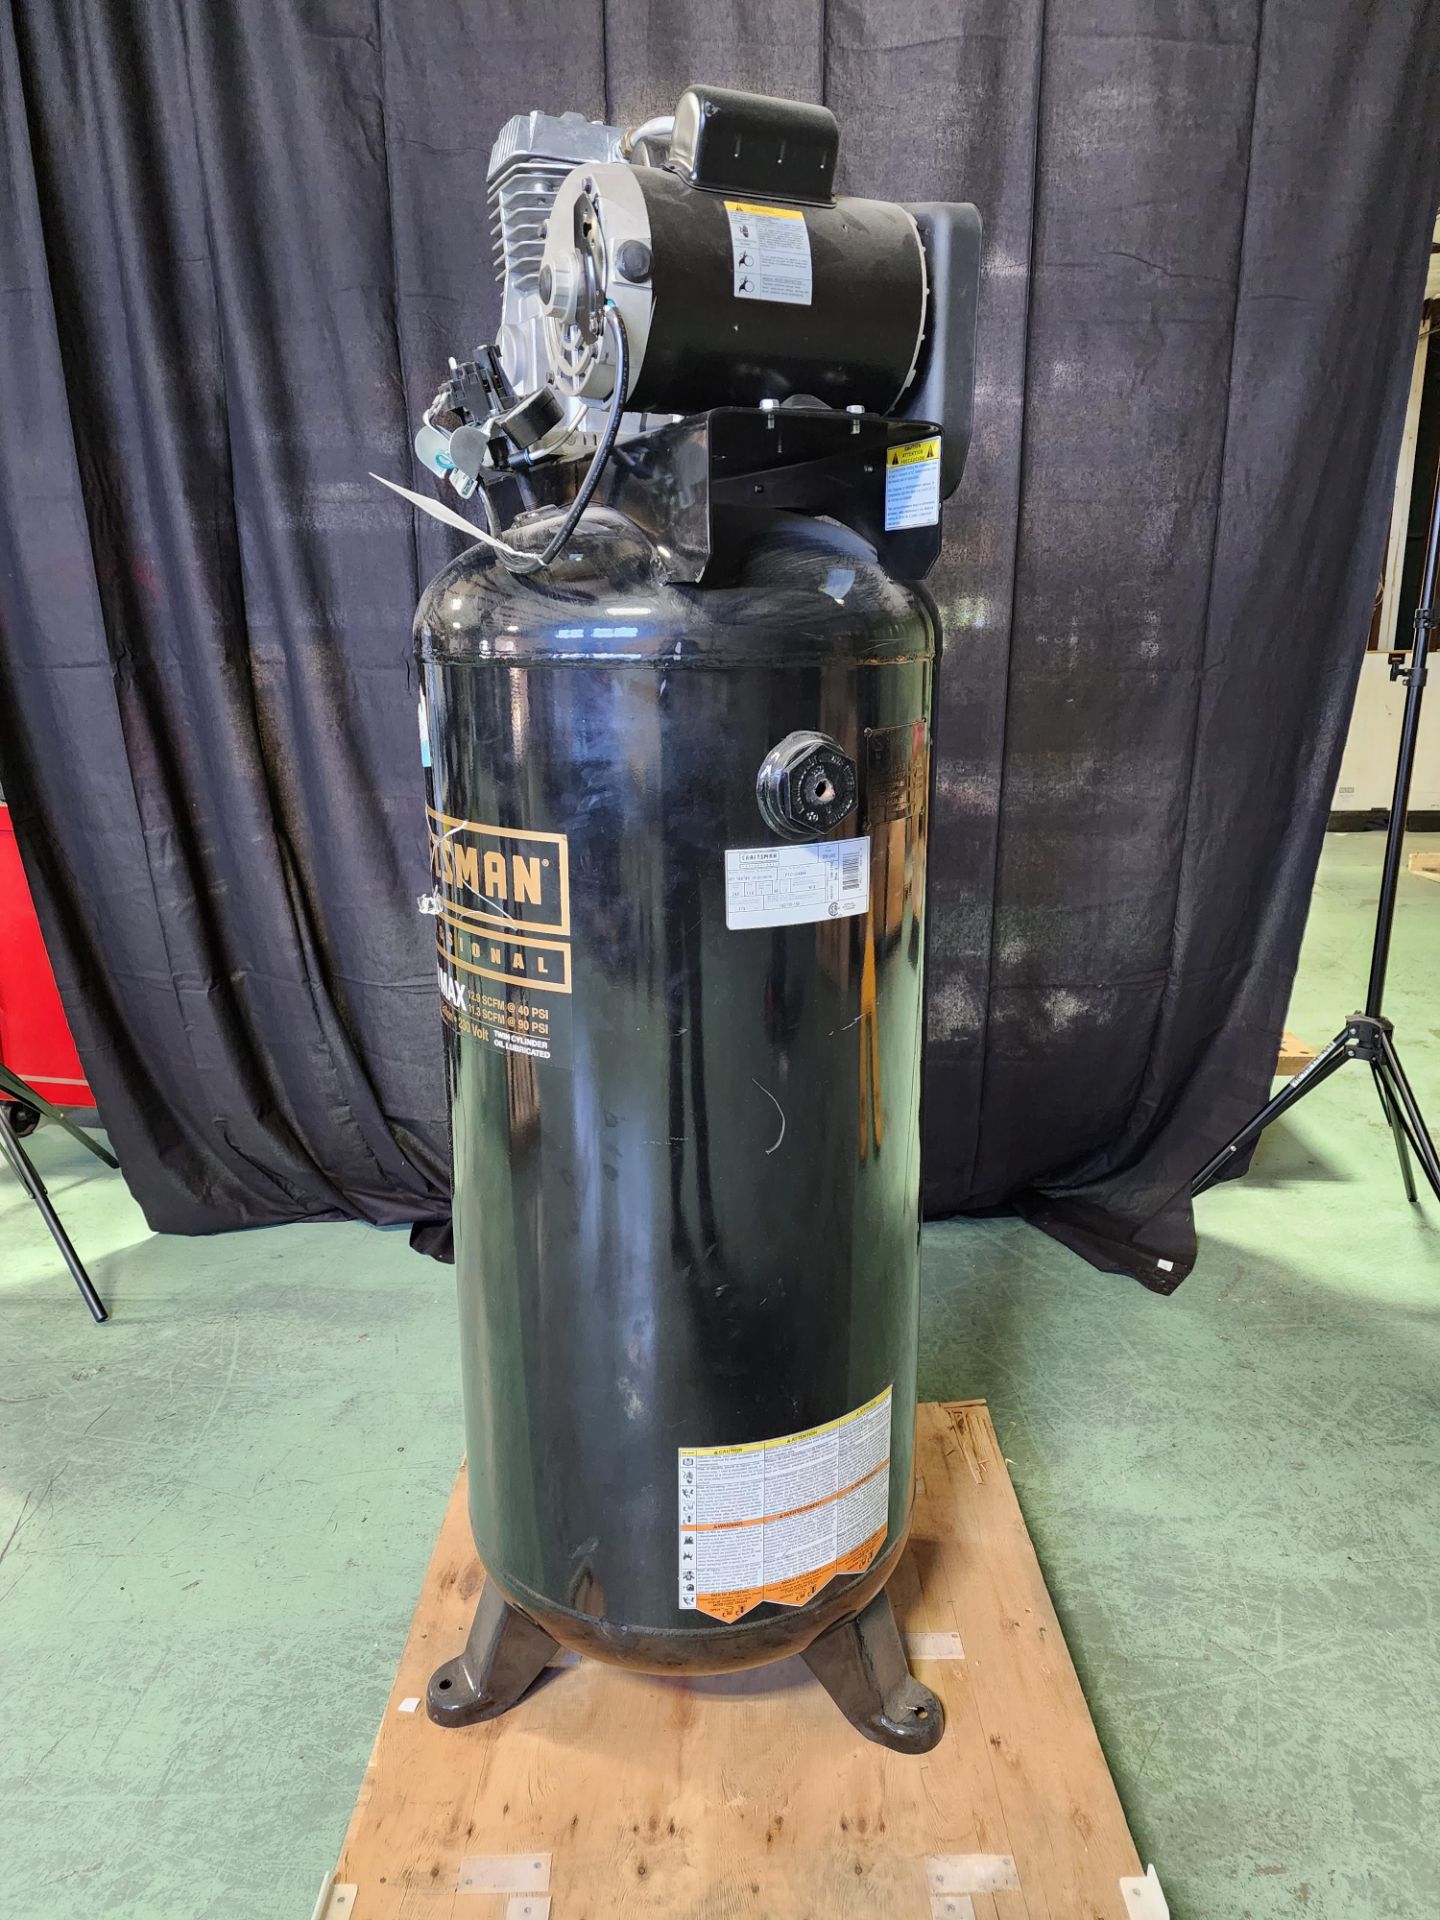 Craftsman Professional Air Compressor - LISTED AS "SALVAGE": 150 PSI, 240 Volt, 3.1 HP, 60 Gallon